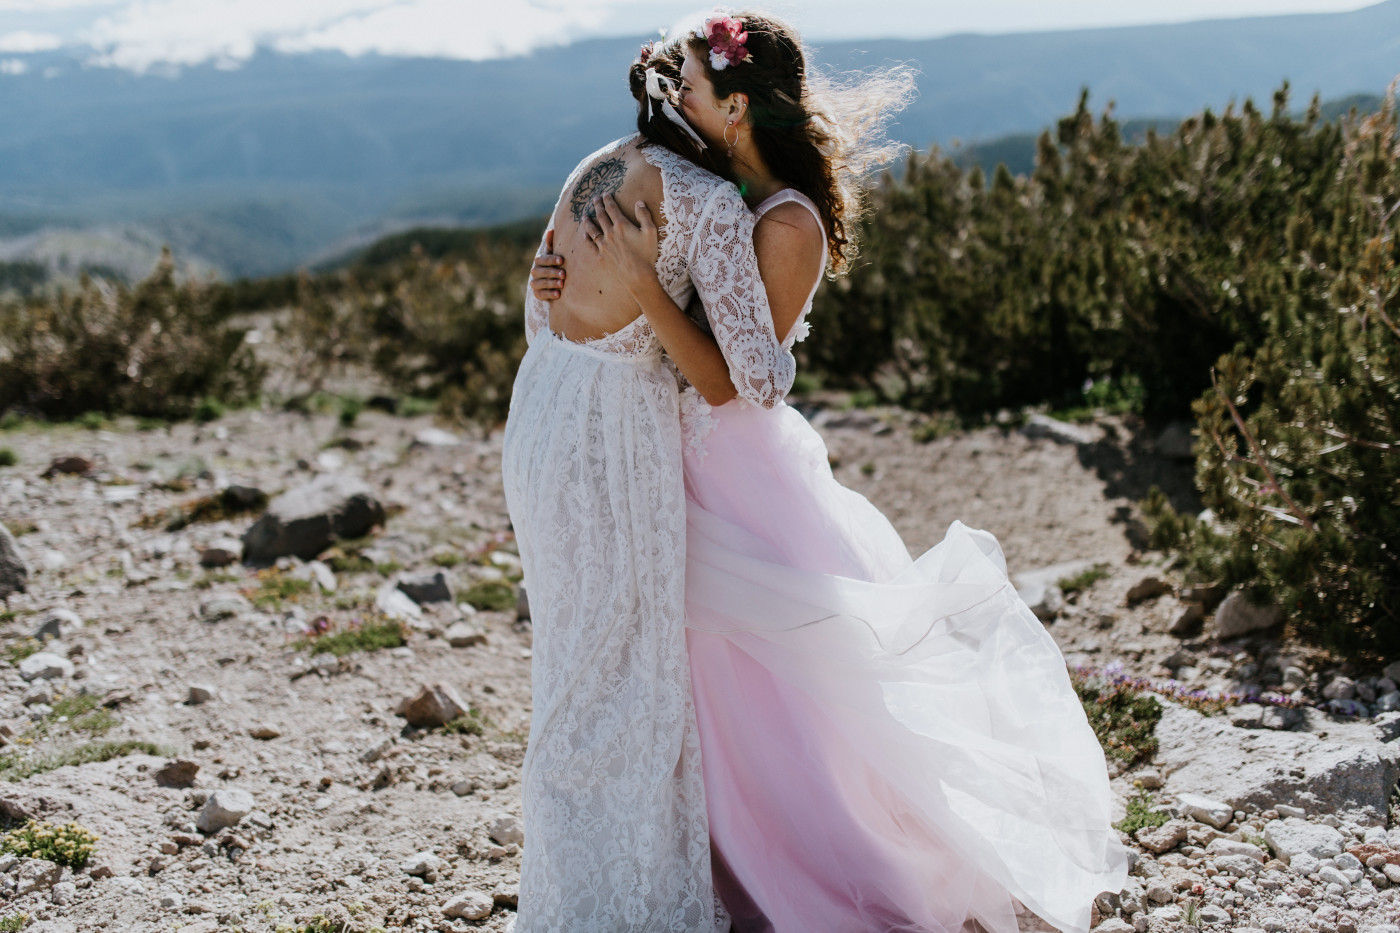 Heather hugs Margaux. Elopement photography at Mount Hood by Sienna Plus Josh.